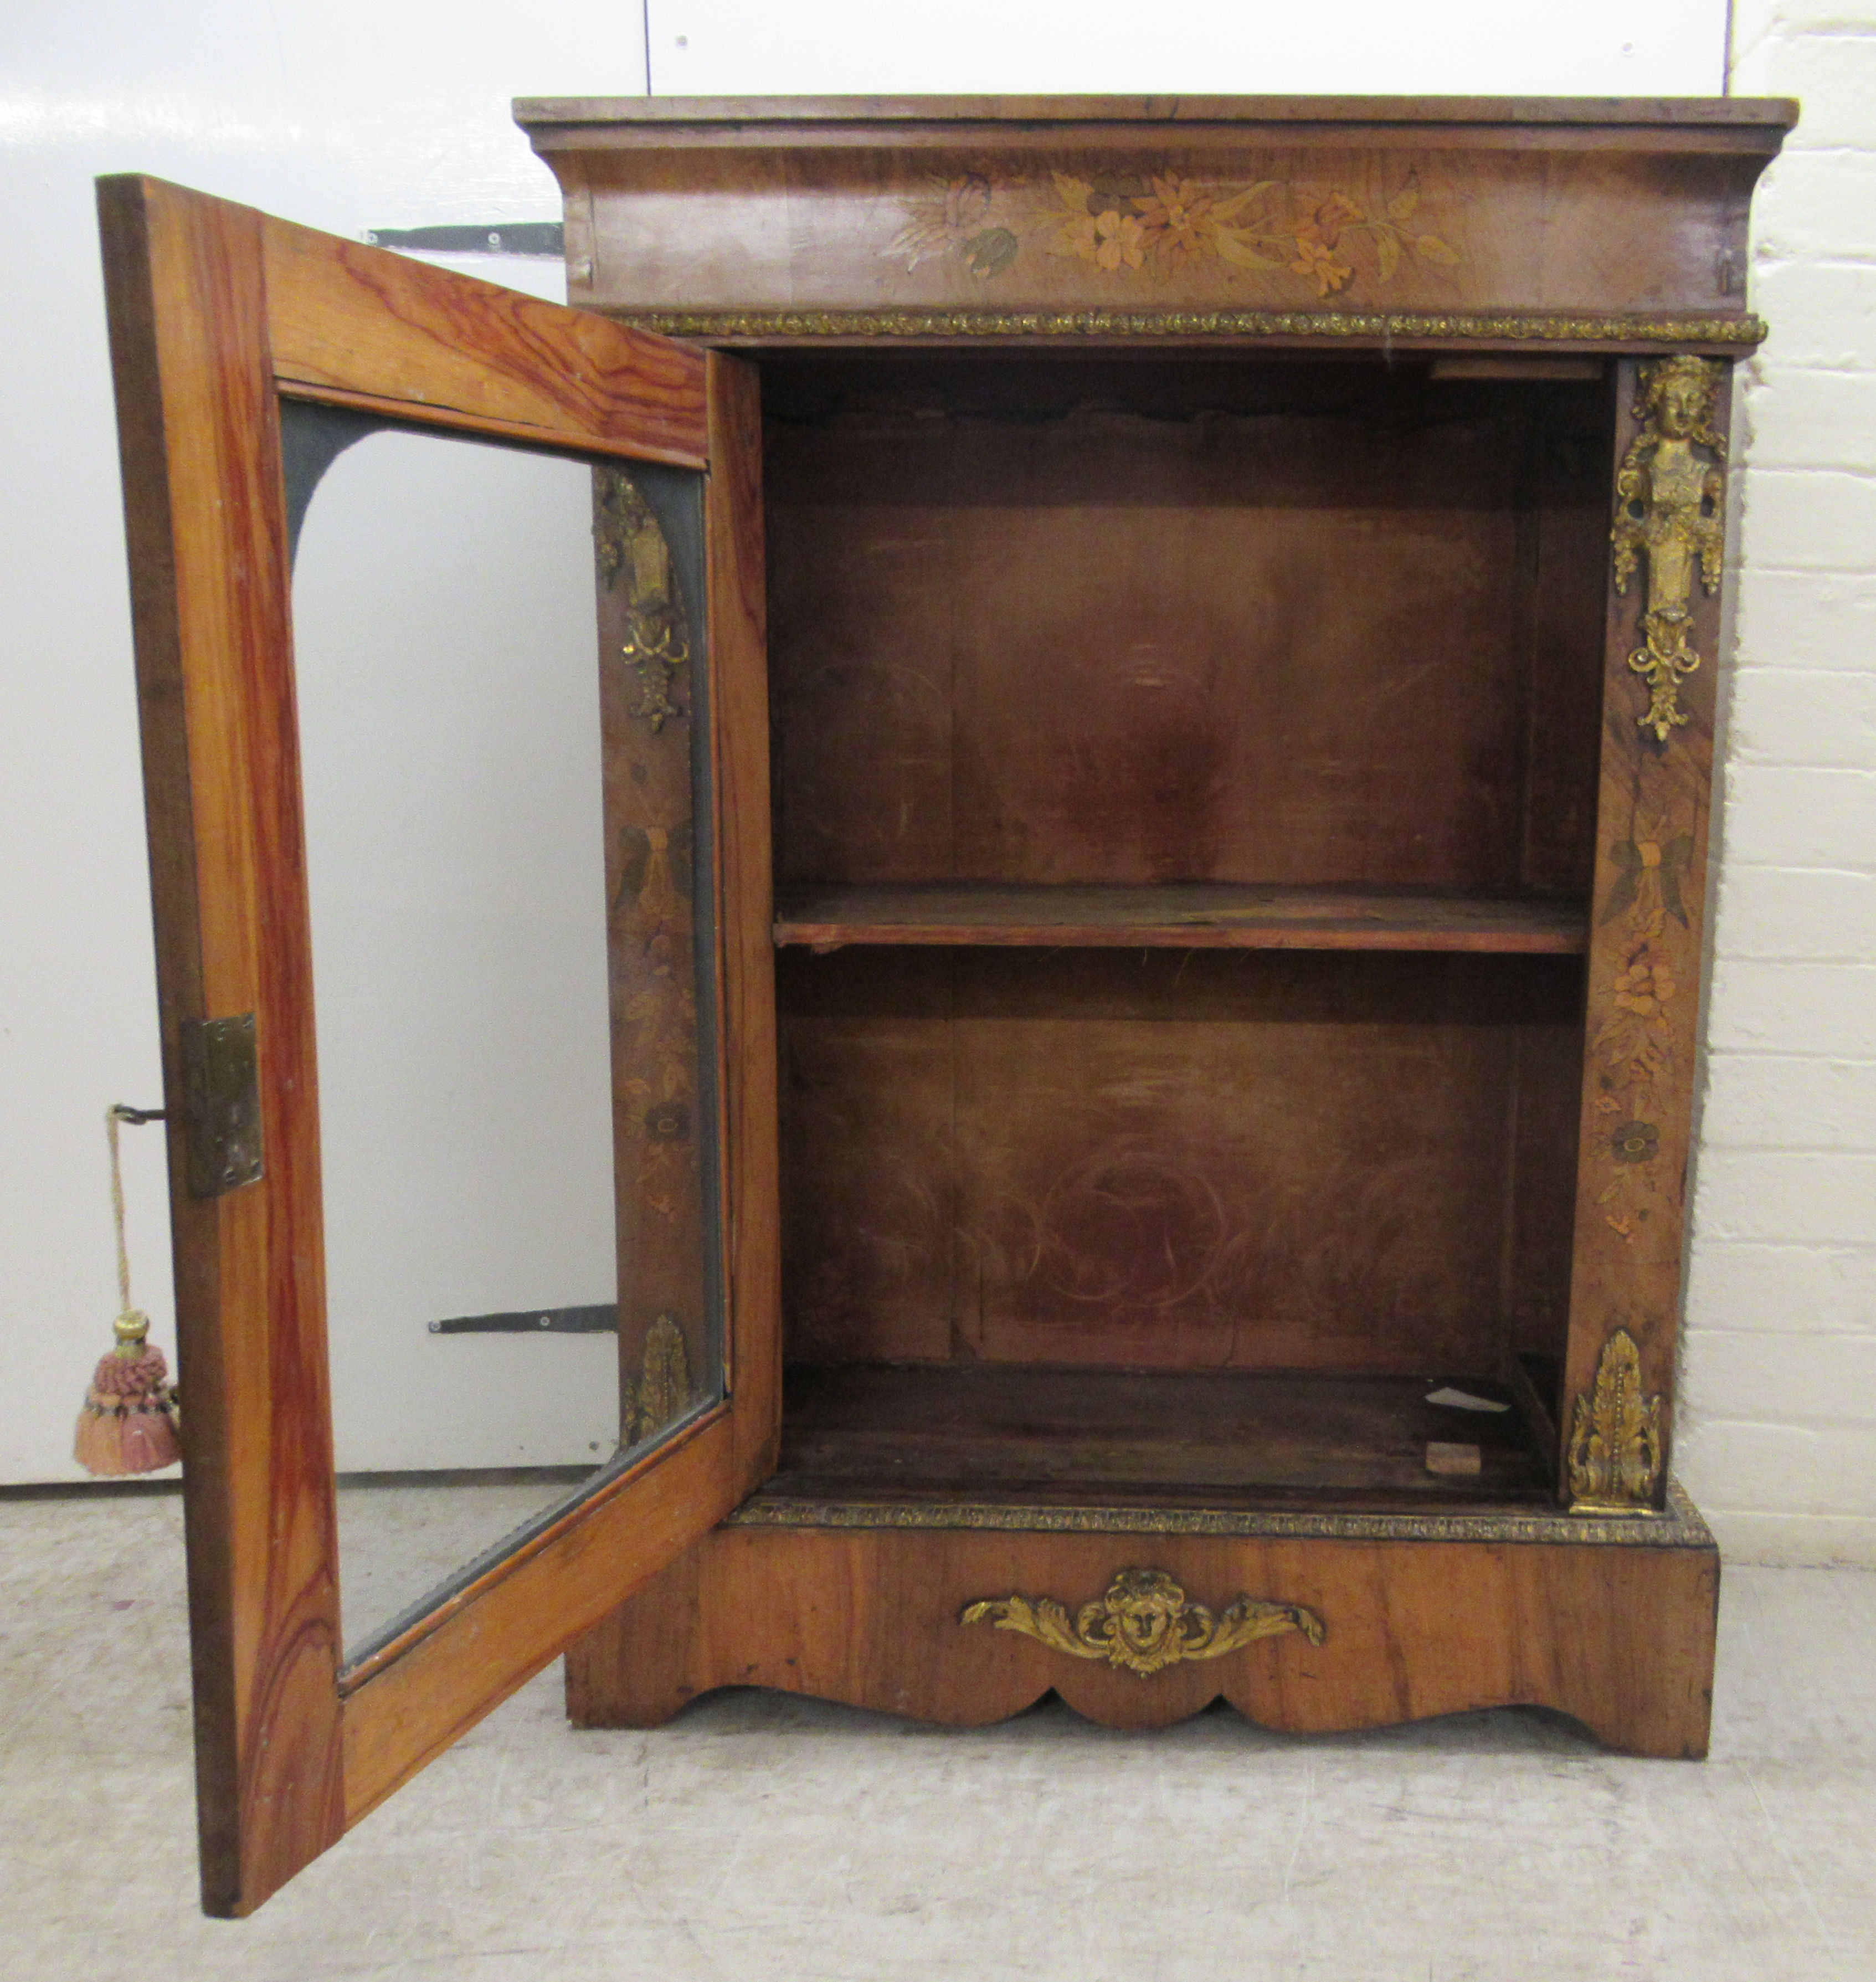 A late 19thC Continental gilt metal mounted walnut and floral marquetry pier cabinet, enclosed by - Image 7 of 9